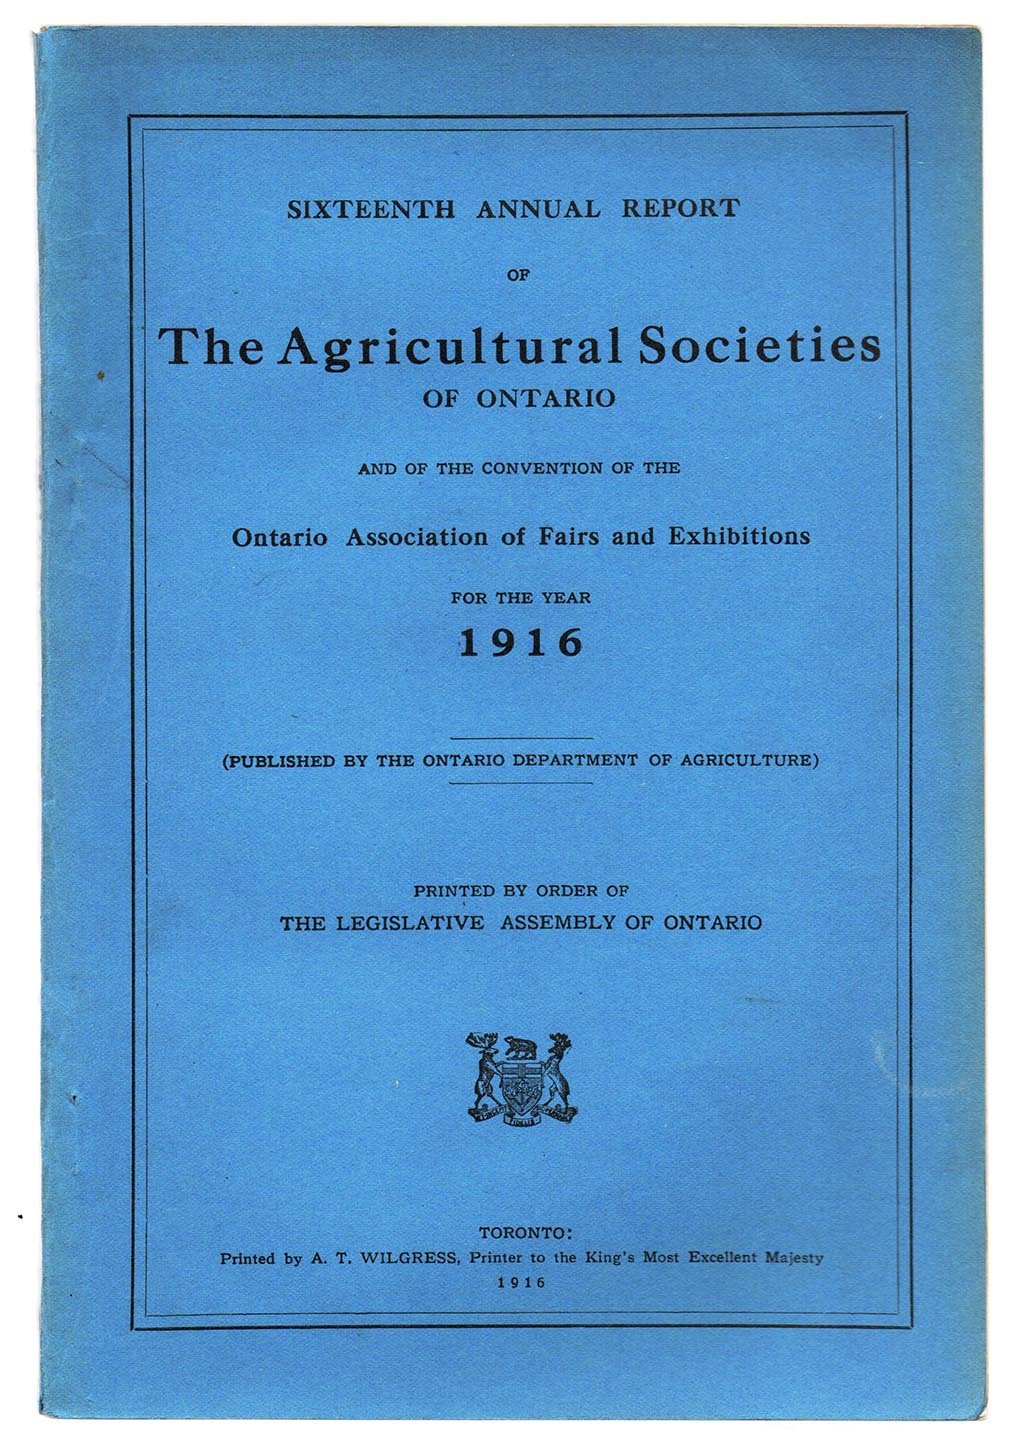 Sixteenth Annual Report of The Agricultural Societies of Ontario and of the Convention of the Ontario Associaton of Fairs and Exhibitioins for the Year 1916